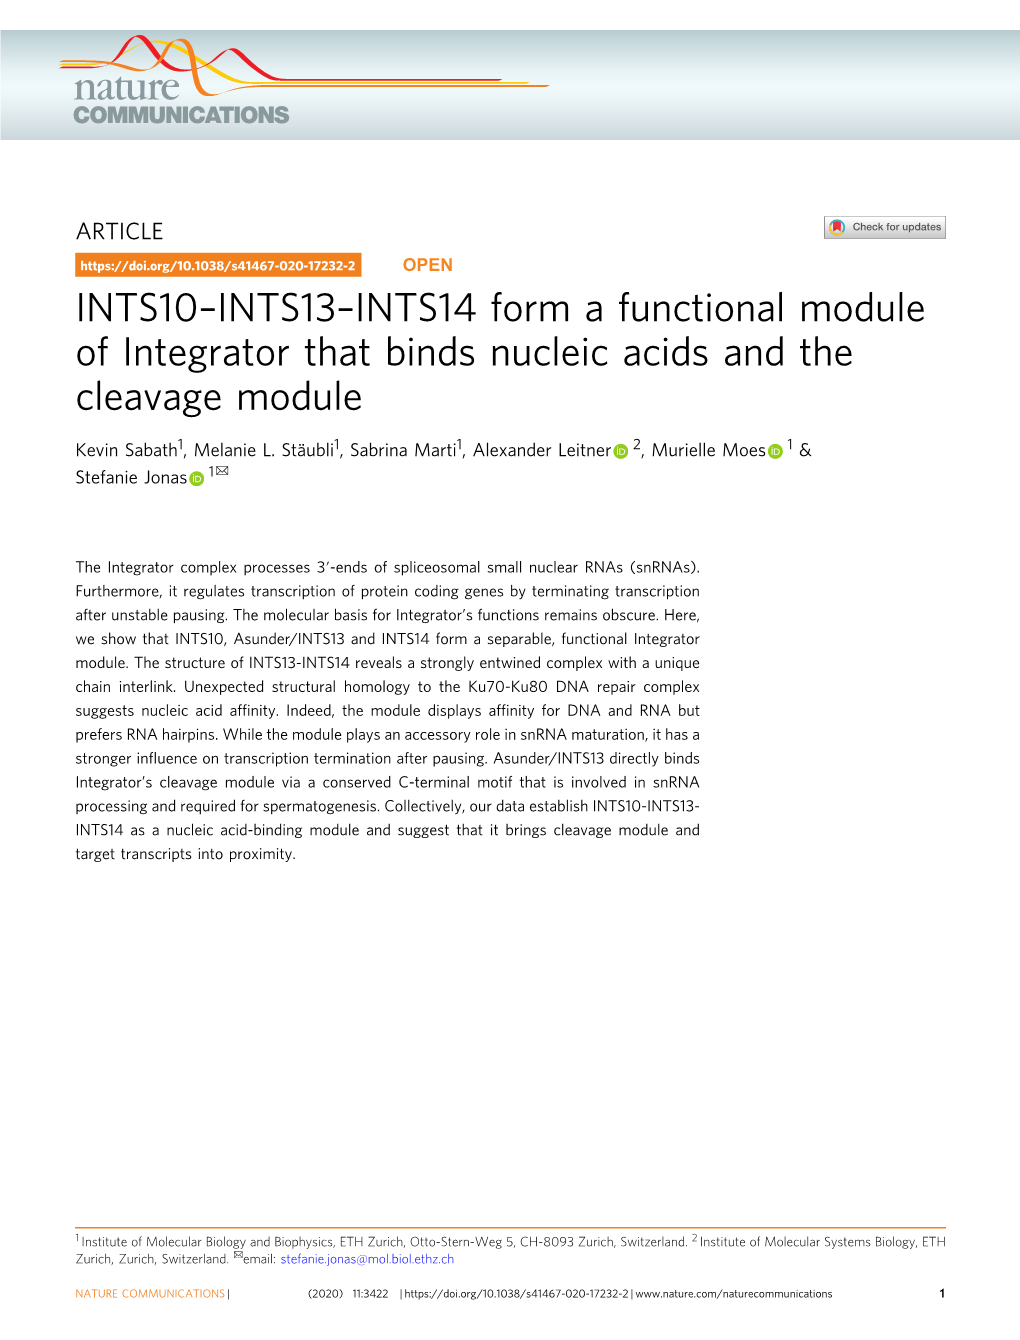 INTS14 Form a Functional Module of Integrator That Binds Nucleic Acids and the Cleavage Module